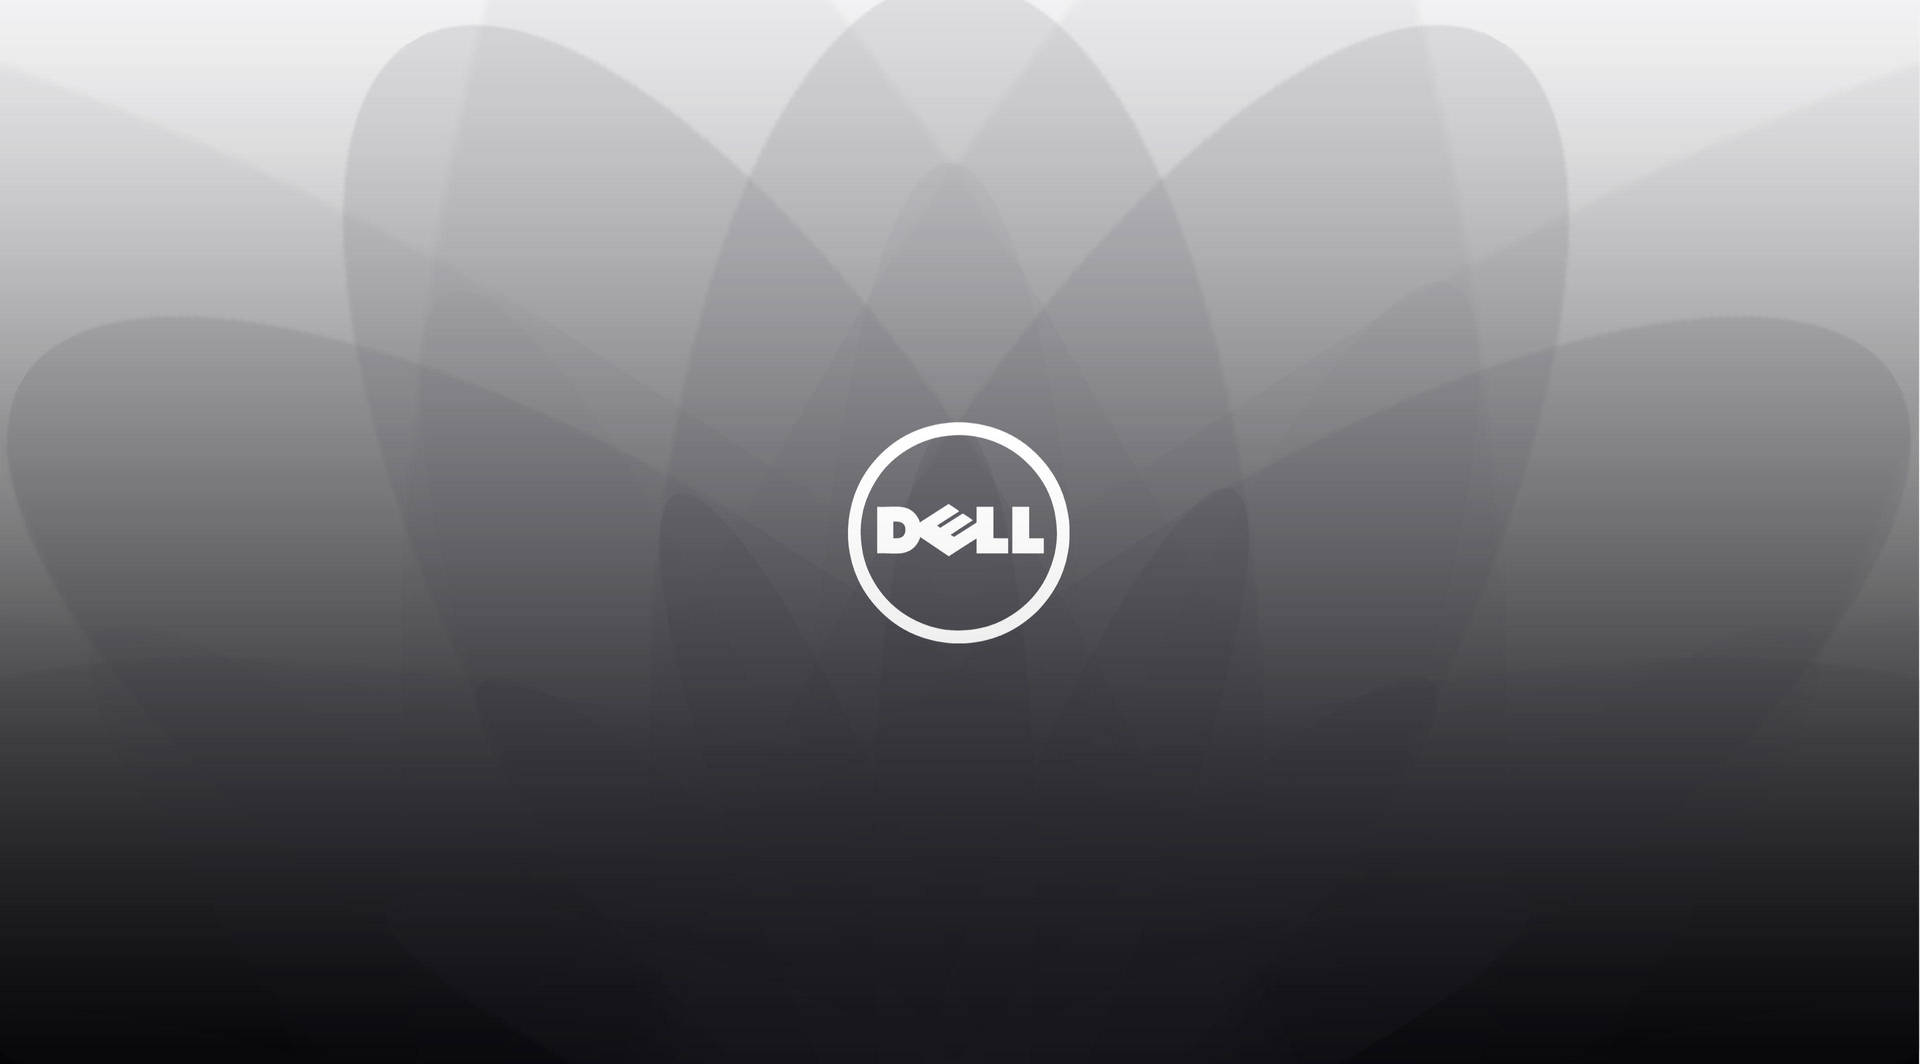 A Dell Hd Logo With Gray And White Design Background